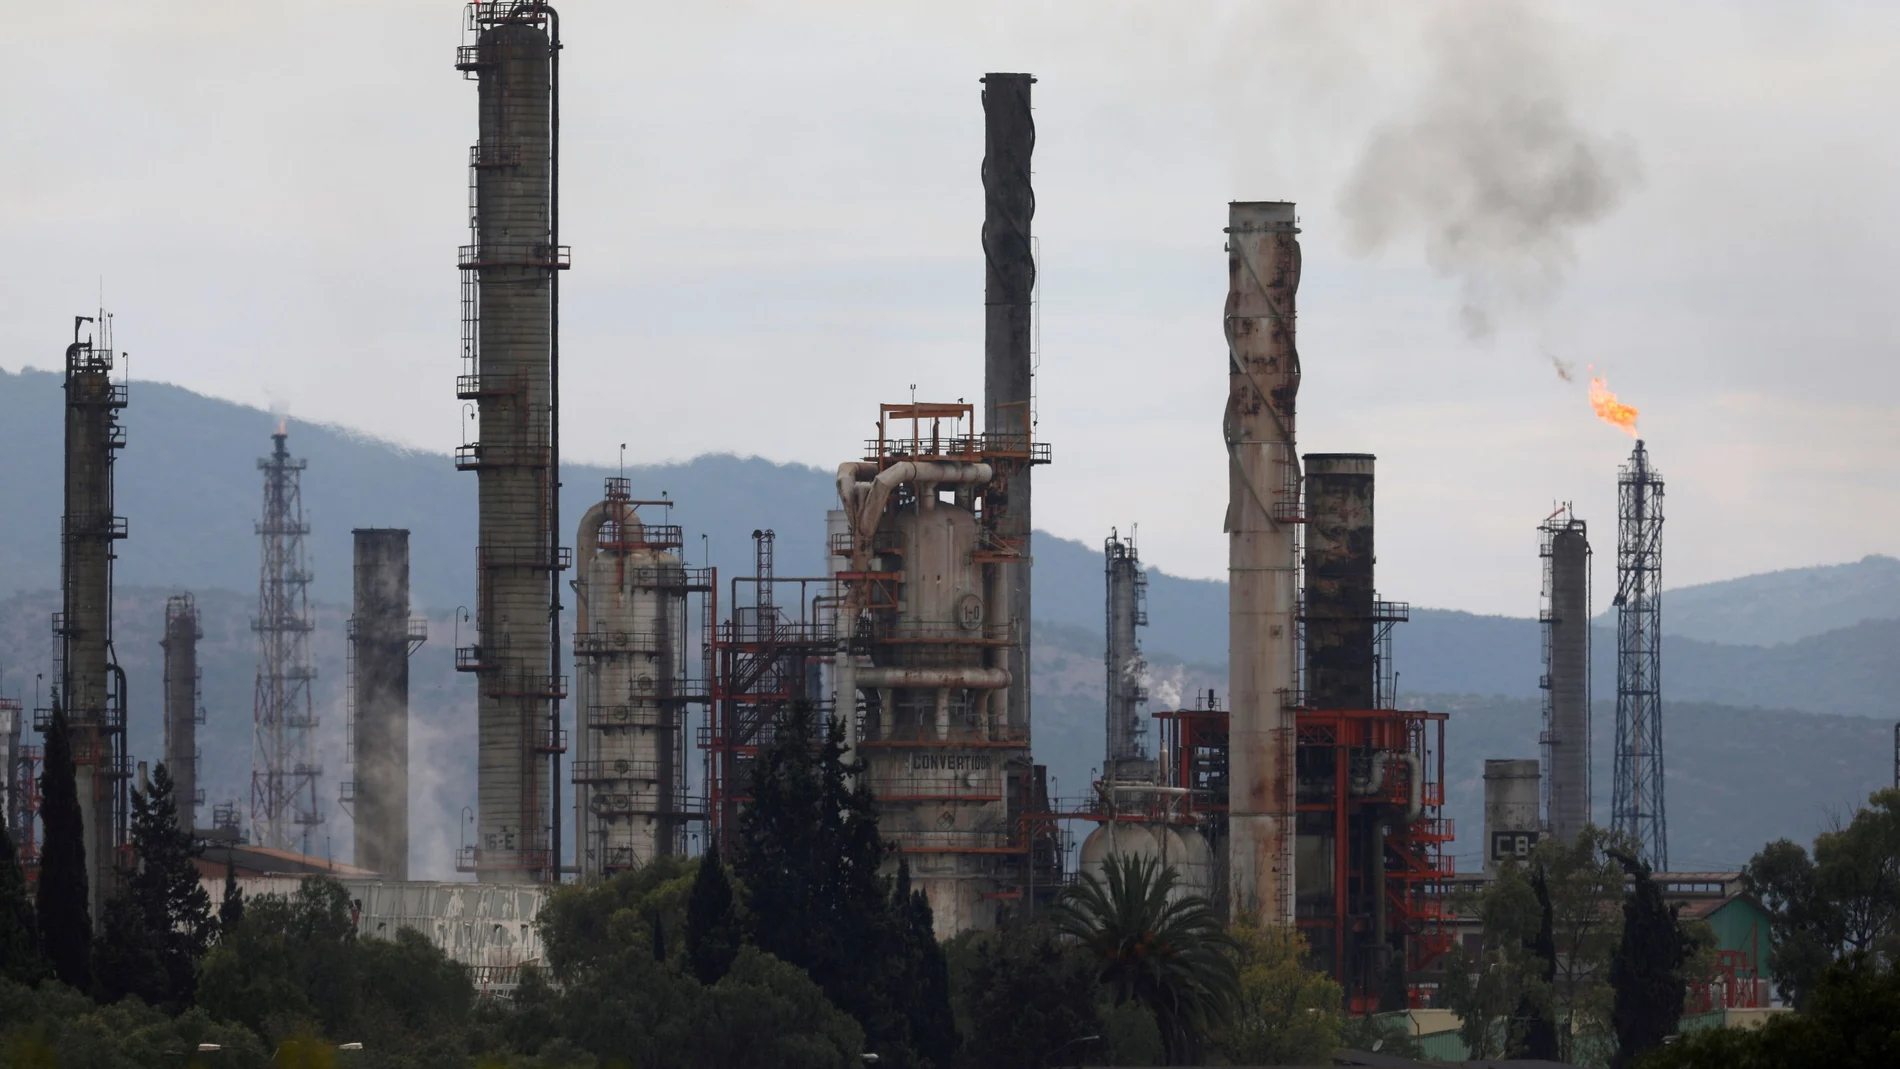 FILE PHOTO: Excess natural gas is burnt, or flared, from Mexican state-owned Pemex's Tula oil refinery, located adjacent to the Tula power plant belonging to national power company Comision Federal de Electricidad, or CFE, in Tula de Allende, north of Mexico City, Mexico June 22, 2020. Picture taken June 22, 2020. REUTERS/Henry Romero/File Photo/File Photo